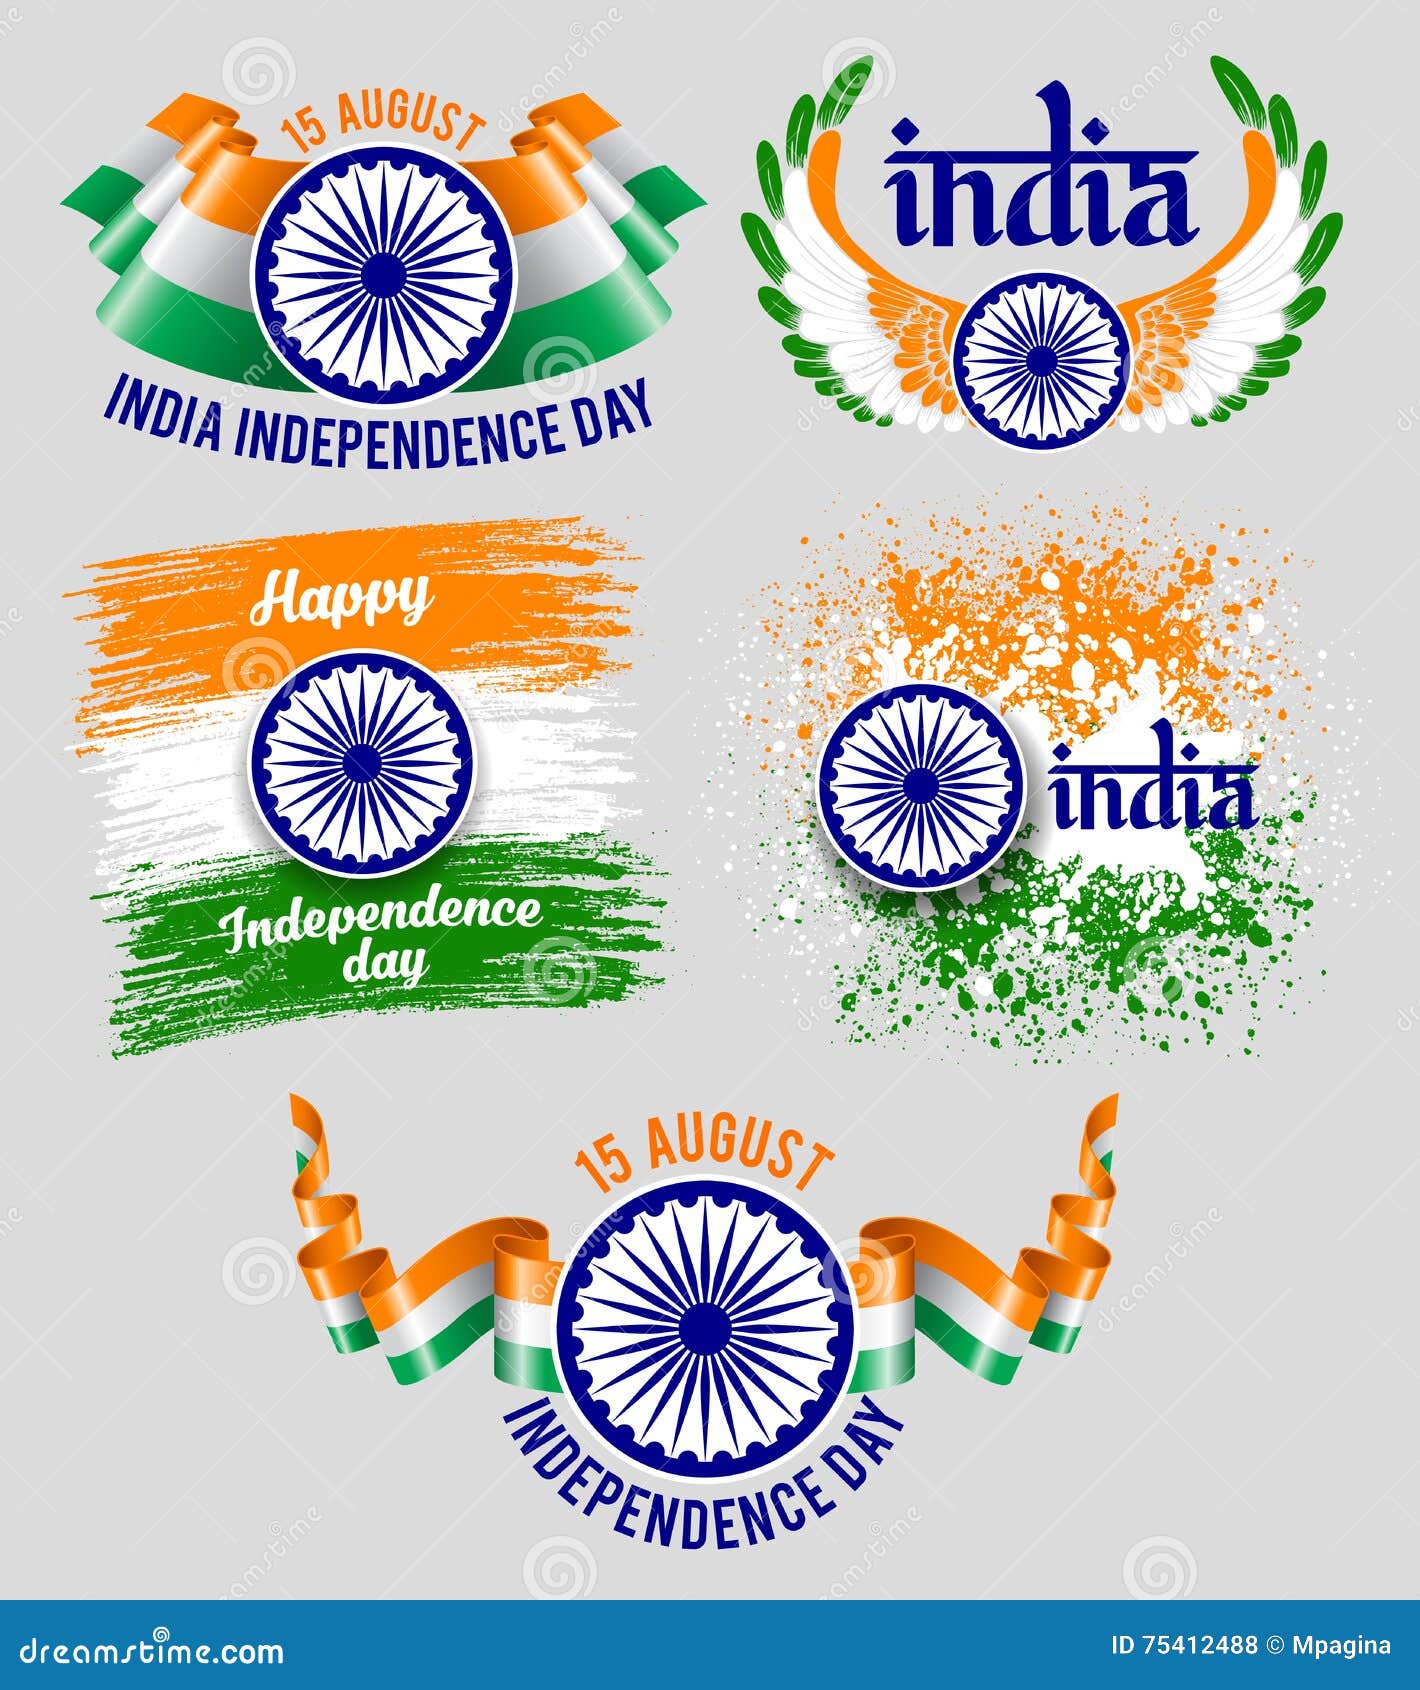 India Independence Day Emblems Set Stock Vector - Illustration of ...